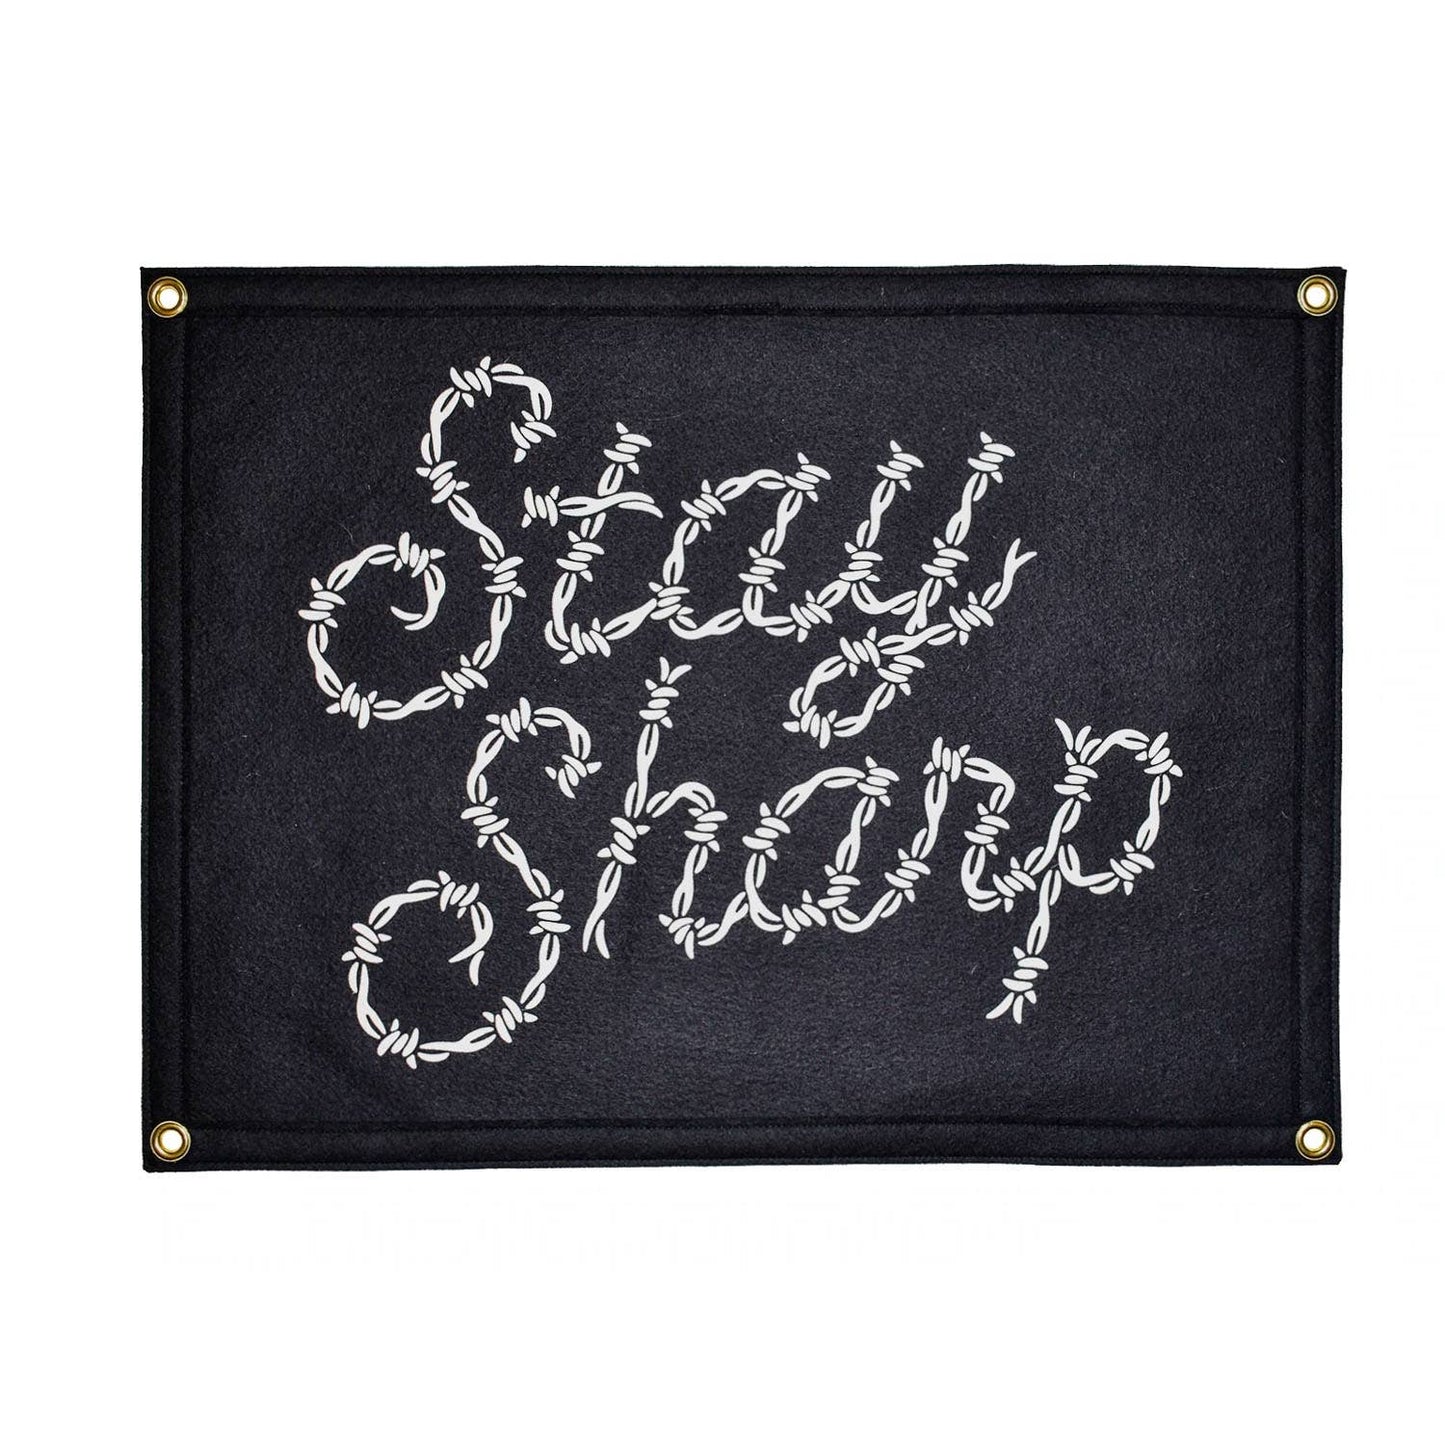 Stay Sharp Camp Flag • Holy Smokes x Oxford Pennant